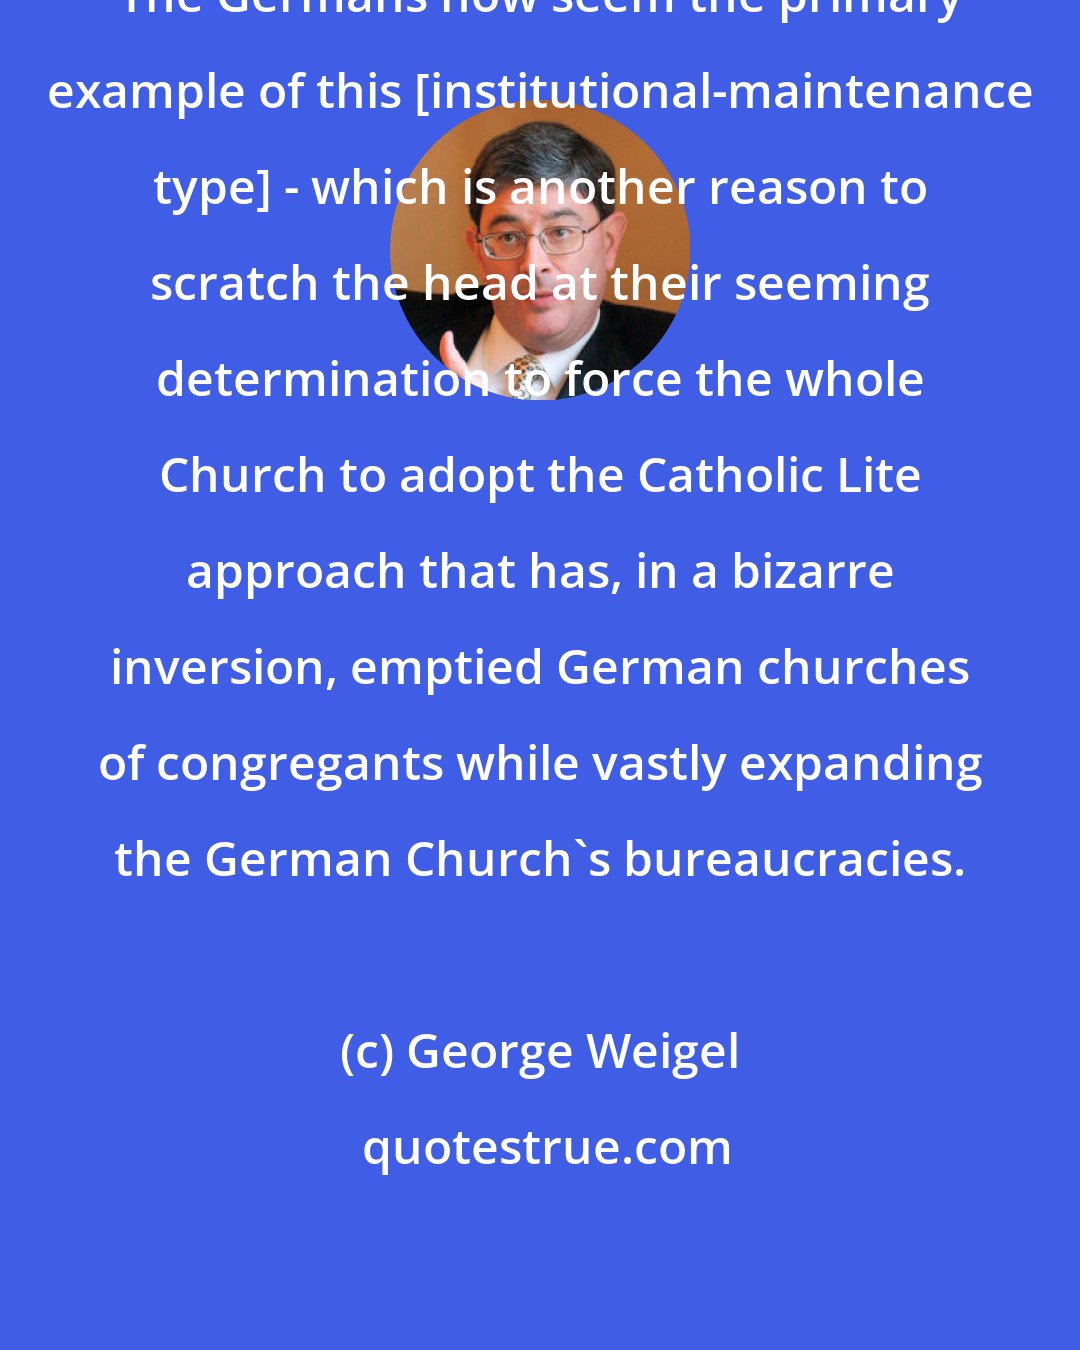 George Weigel: The Germans now seem the primary example of this [institutional-maintenance type] - which is another reason to scratch the head at their seeming determination to force the whole Church to adopt the Catholic Lite approach that has, in a bizarre inversion, emptied German churches of congregants while vastly expanding the German Church's bureaucracies.